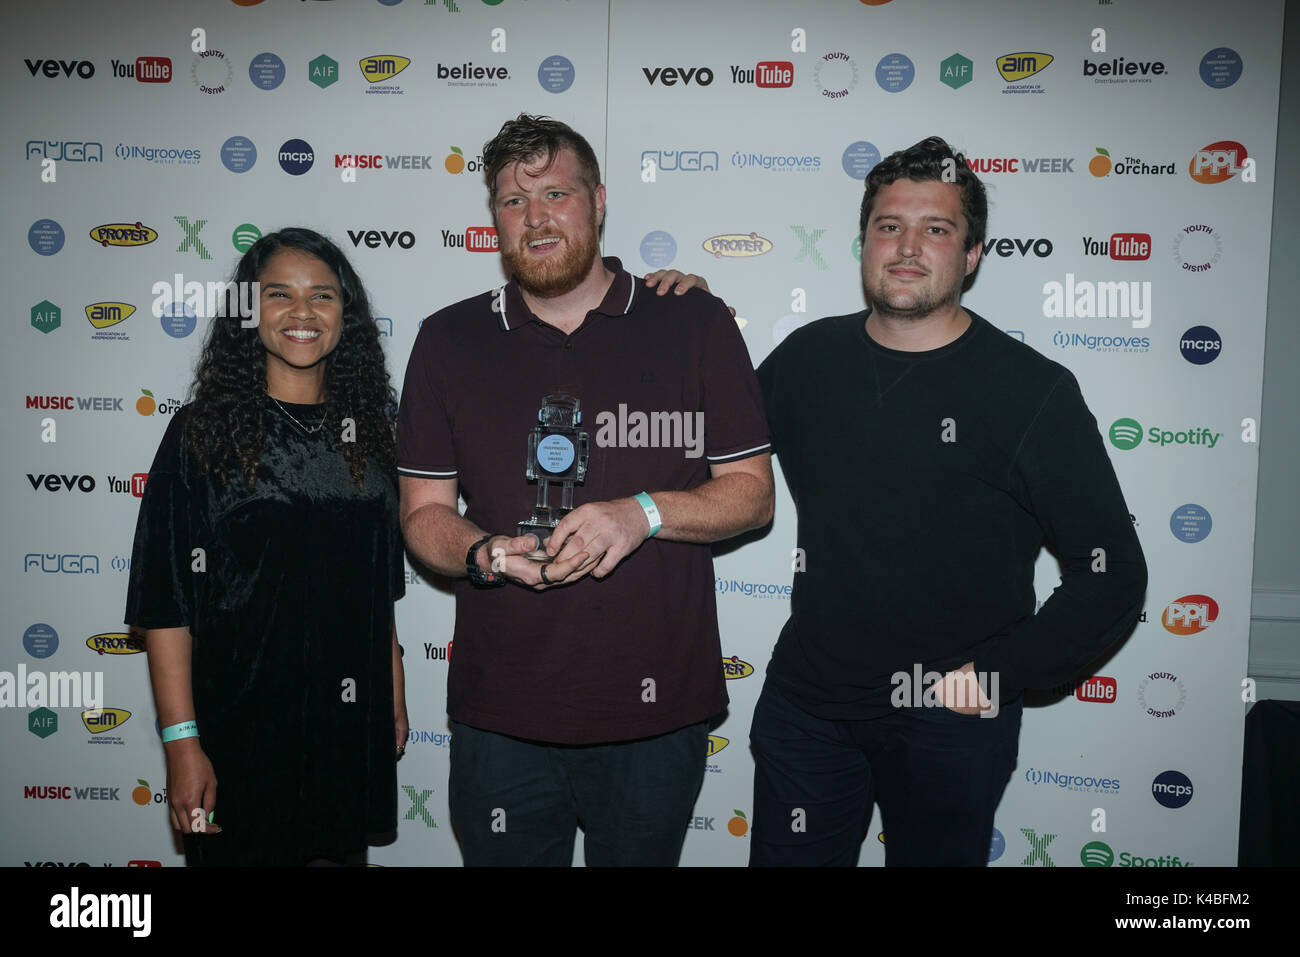 The Brewery, London, England, UK. 5th Sep, 2017. The 2017 AIM Awards took place last night, Tuesday, 5 September, at East London's The Brewery. Organised by the Association of Independent Music to highlight the UK's vibrant independent sector, this year's event was hosted by MistaJam and Clara Amfo and saw performances by British rapper Dave and breakout indie-rockers Public Service Broadcasting, plus a list of winners that included big names, future stars and heroes of the independent music community. Credit: See Li/Alamy Live News Stock Photo